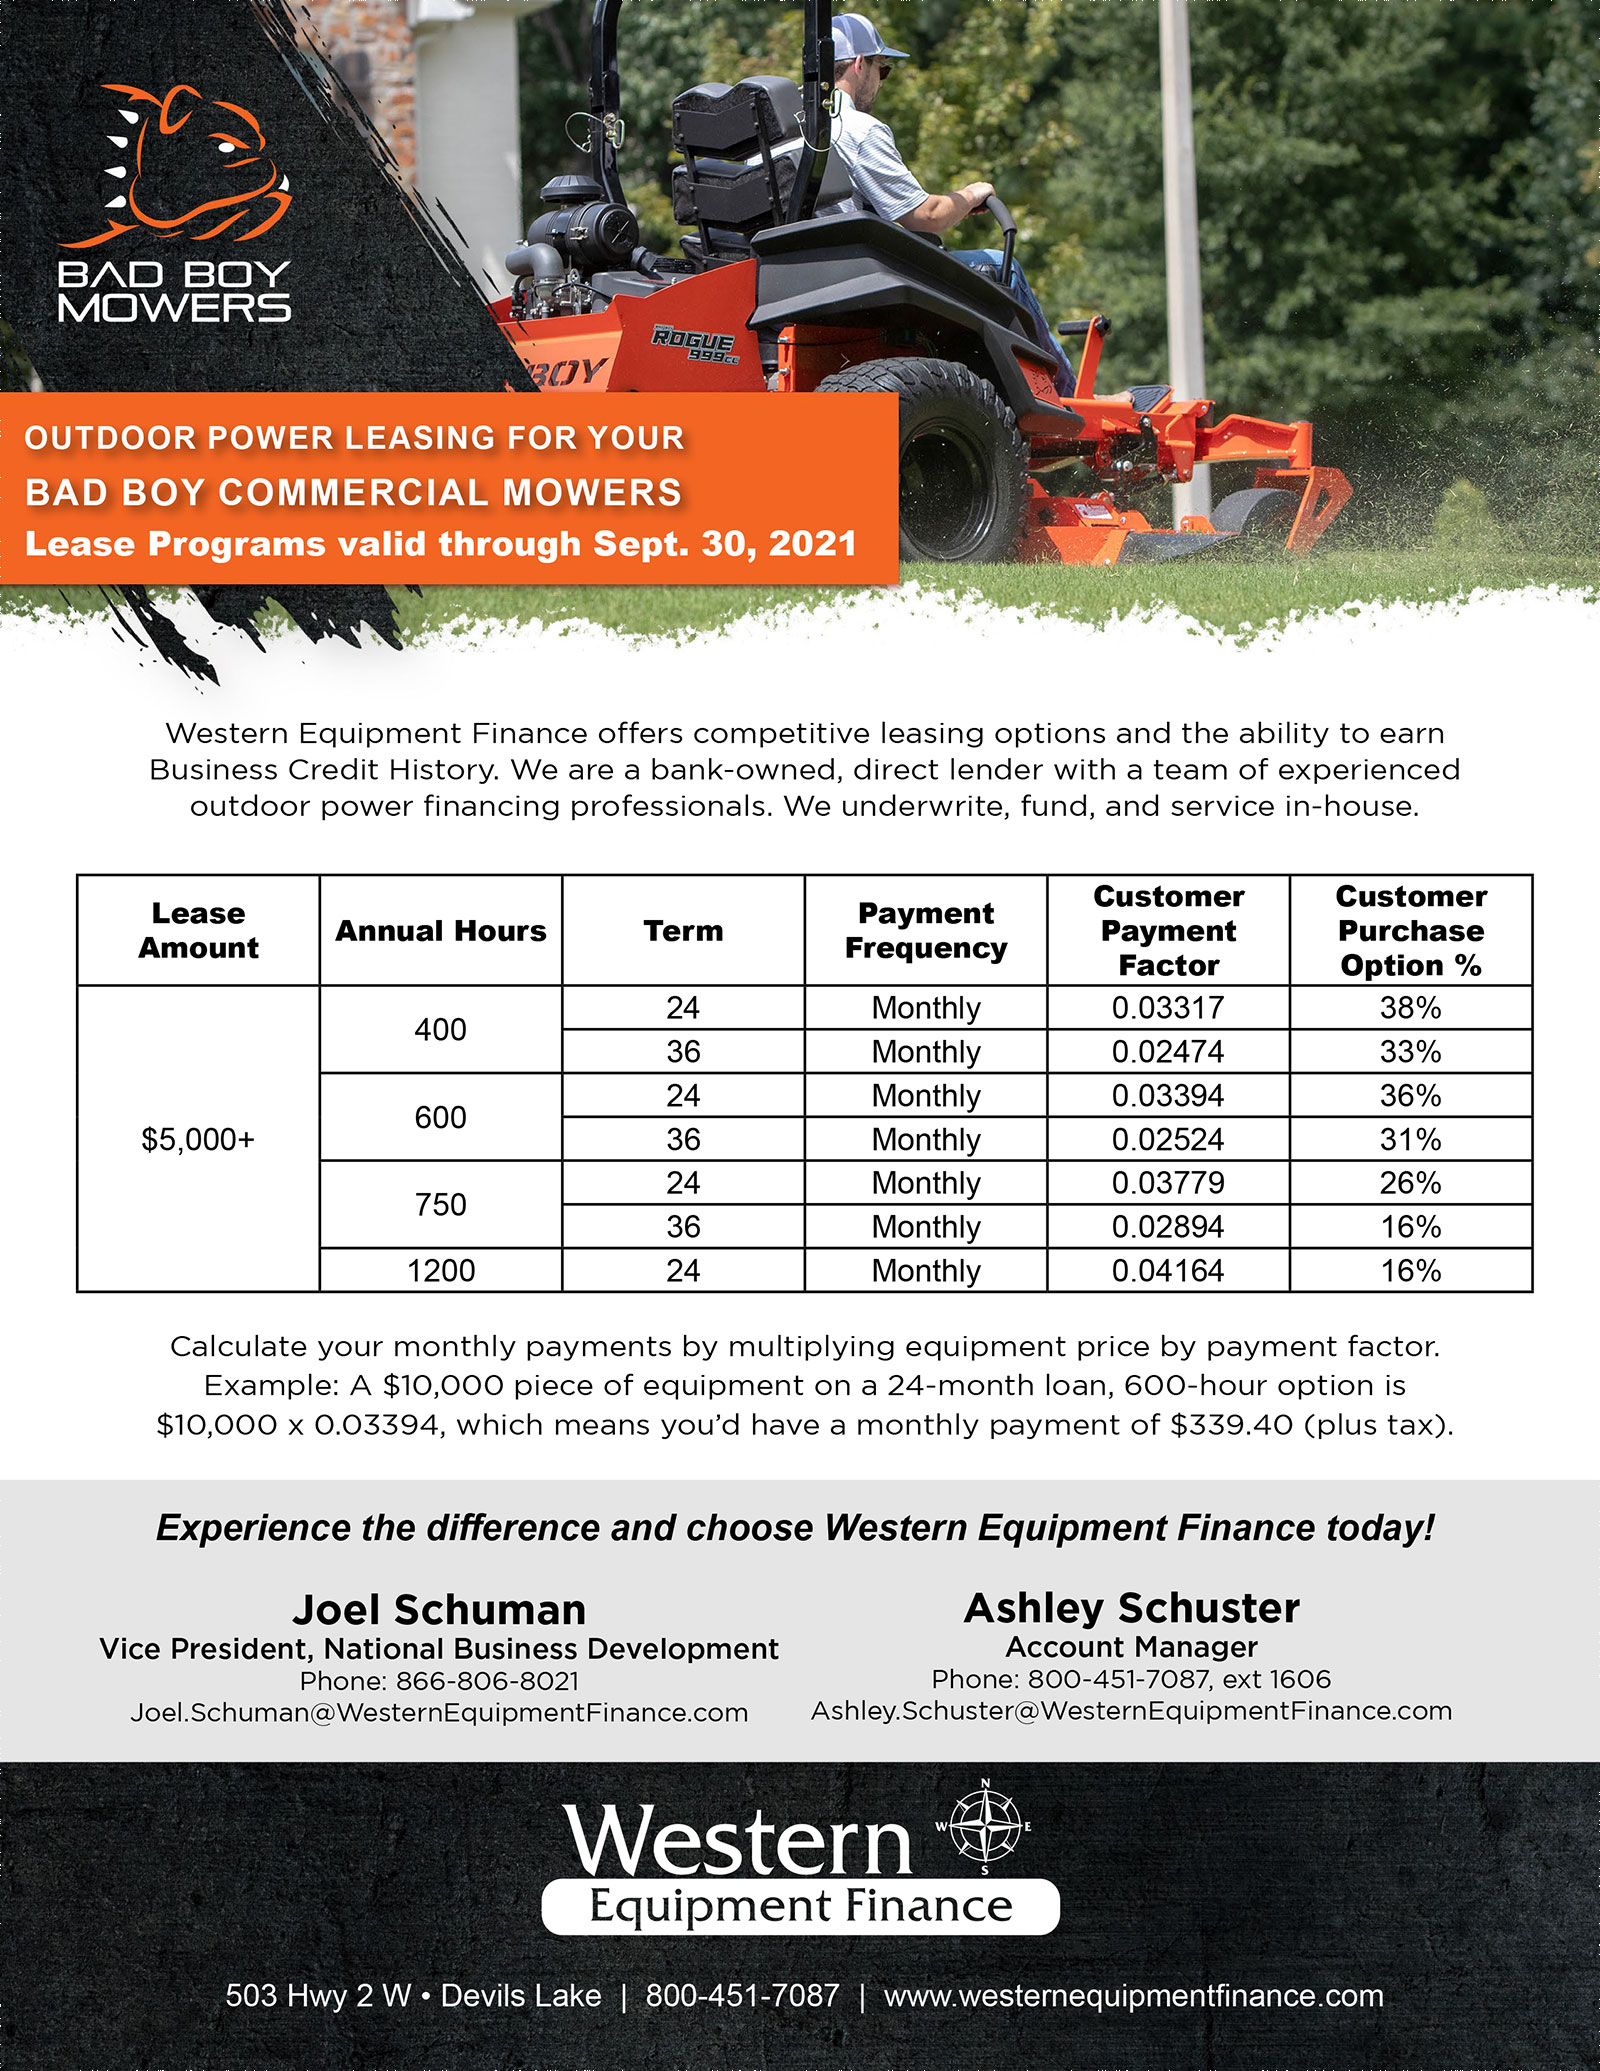 Learn More About Western Equipment Finance